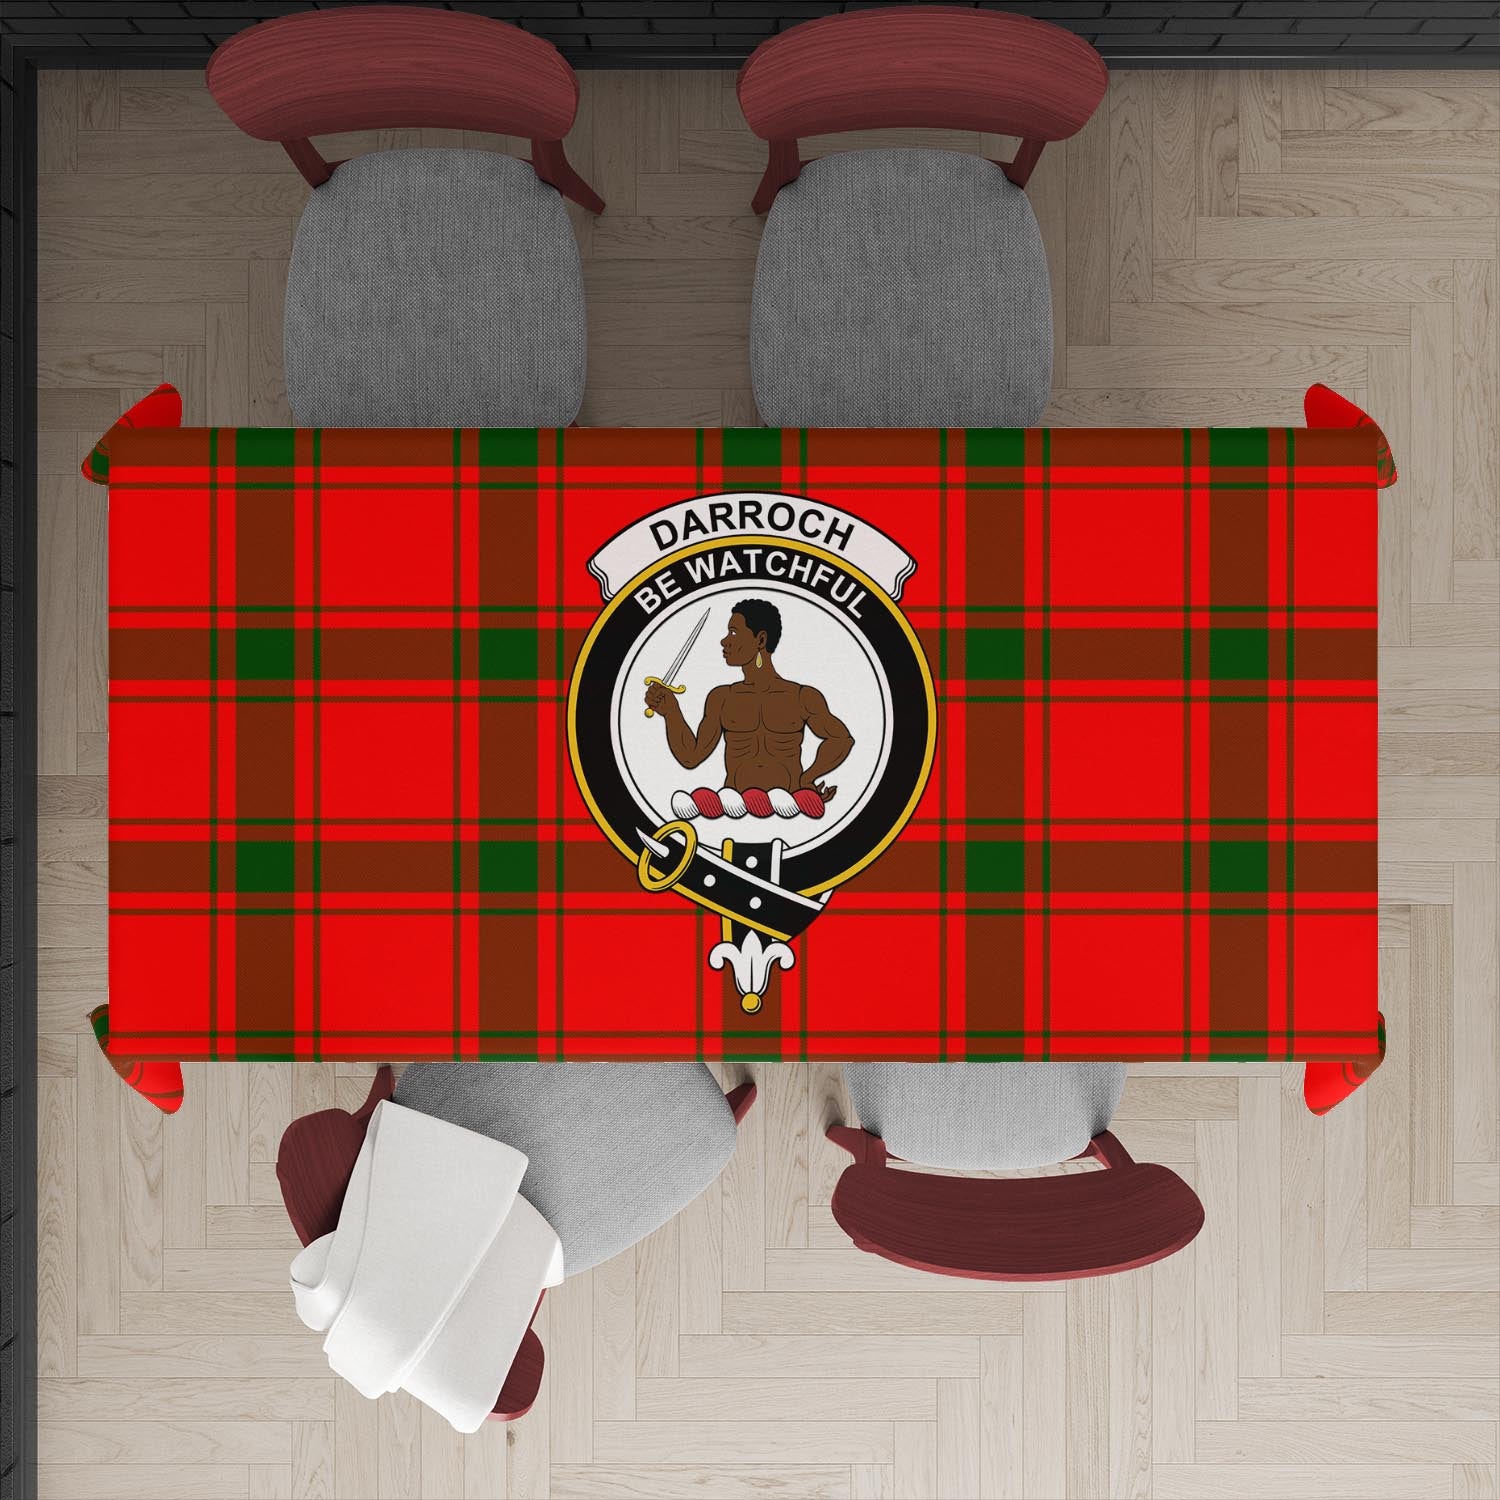 darroch-tatan-tablecloth-with-family-crest